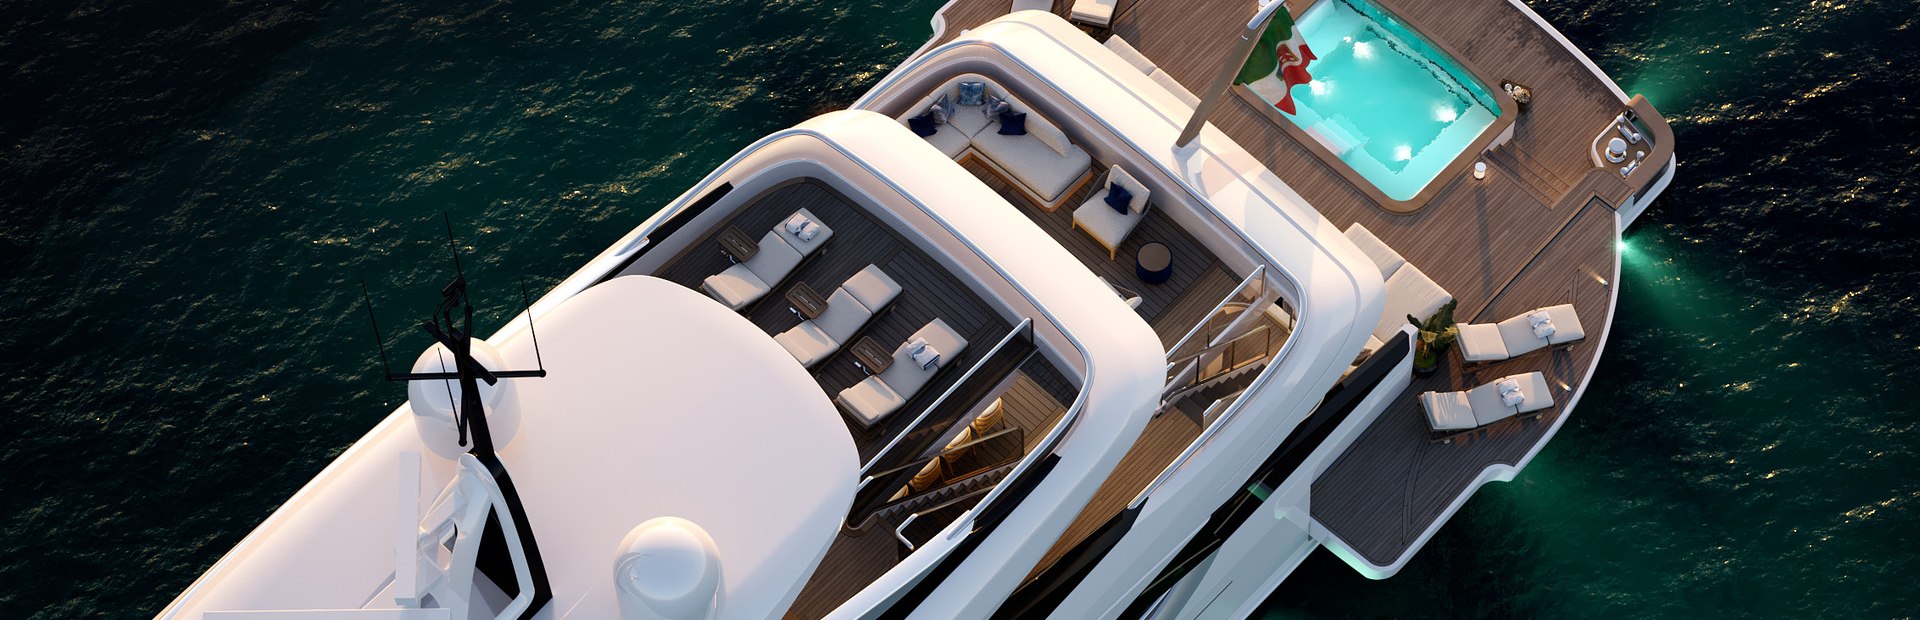 B.Now 50m Oasis Yacht